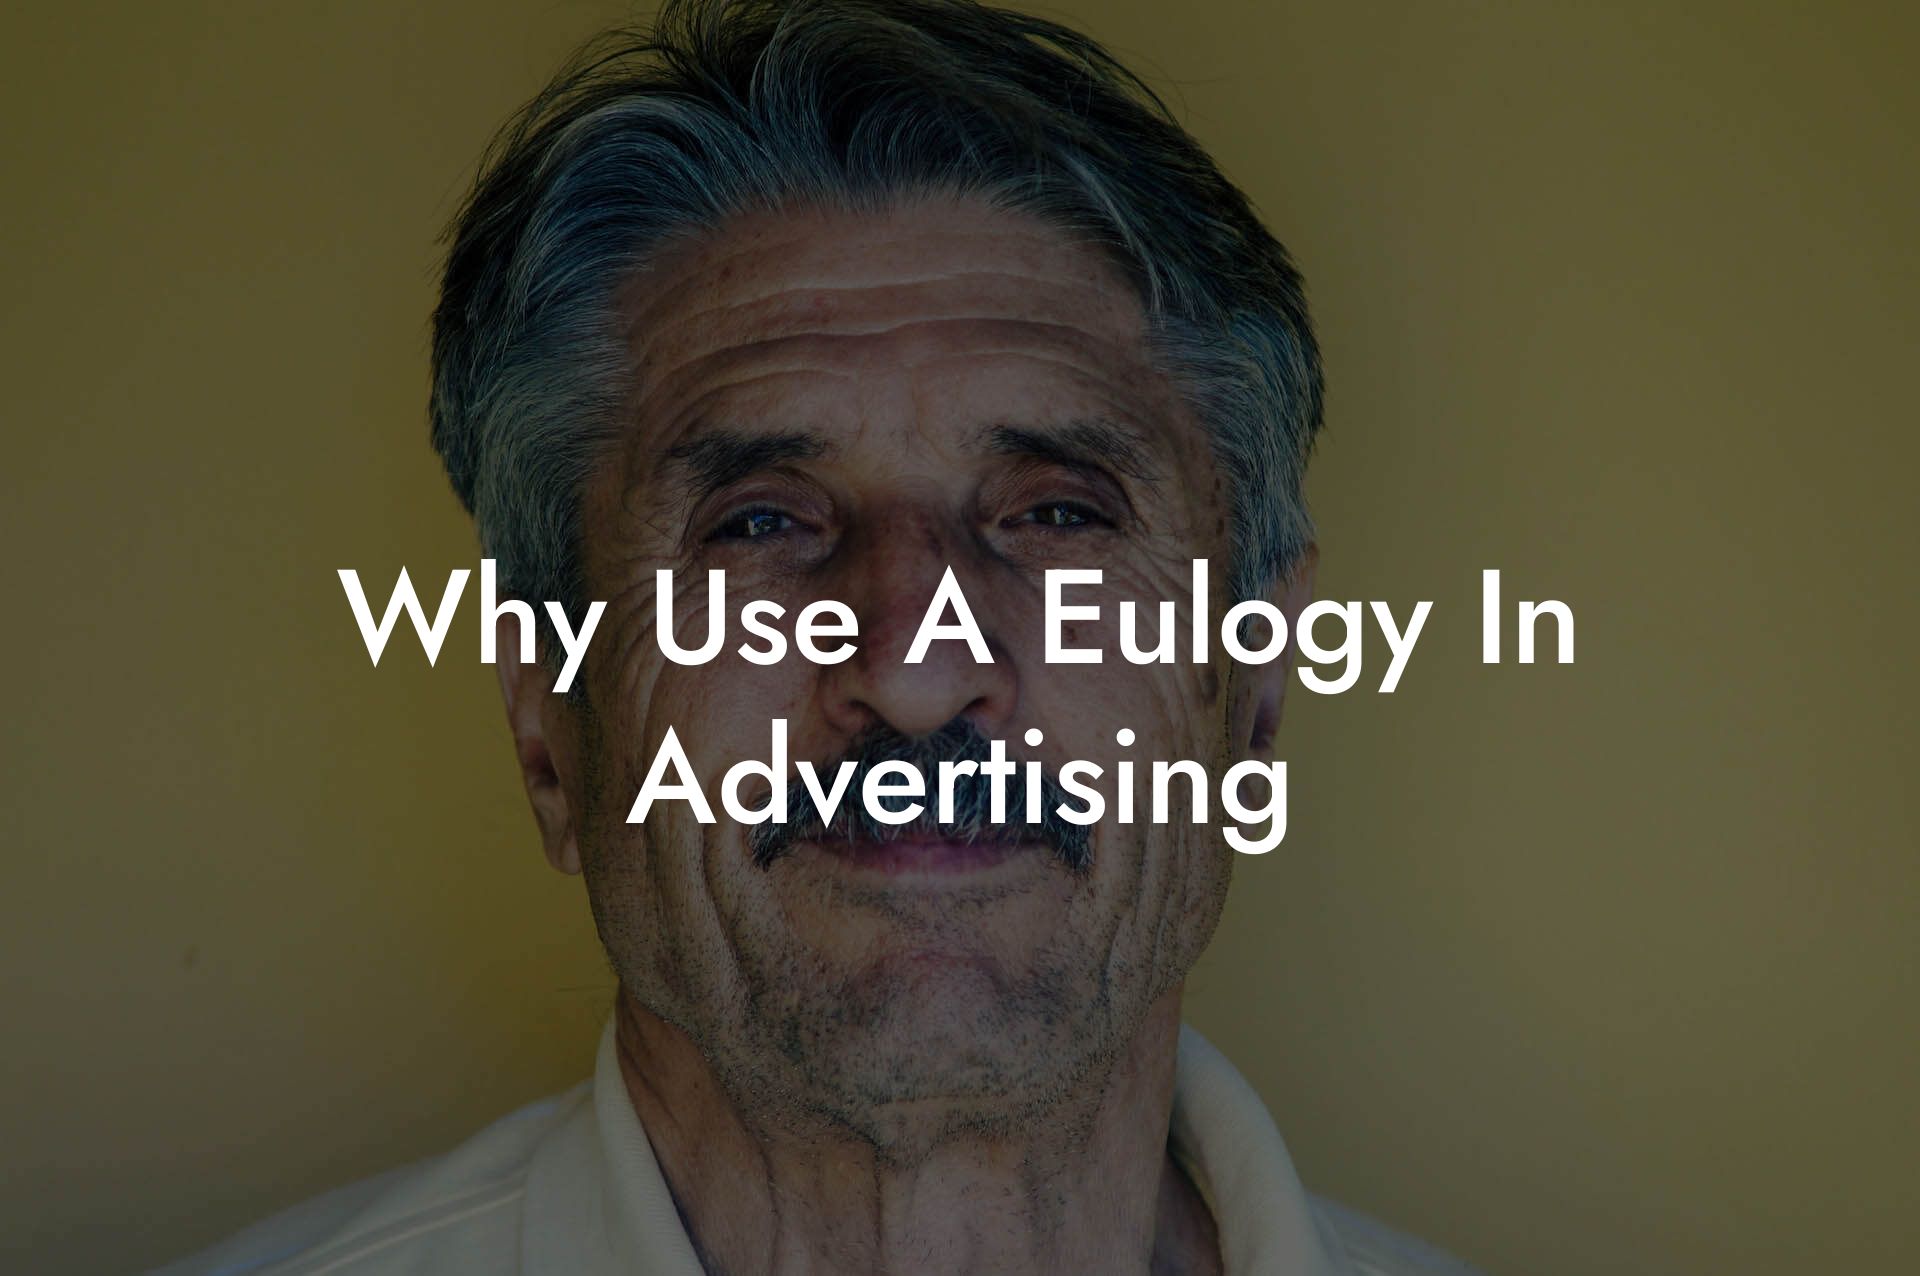 Why Use A Eulogy In Advertising